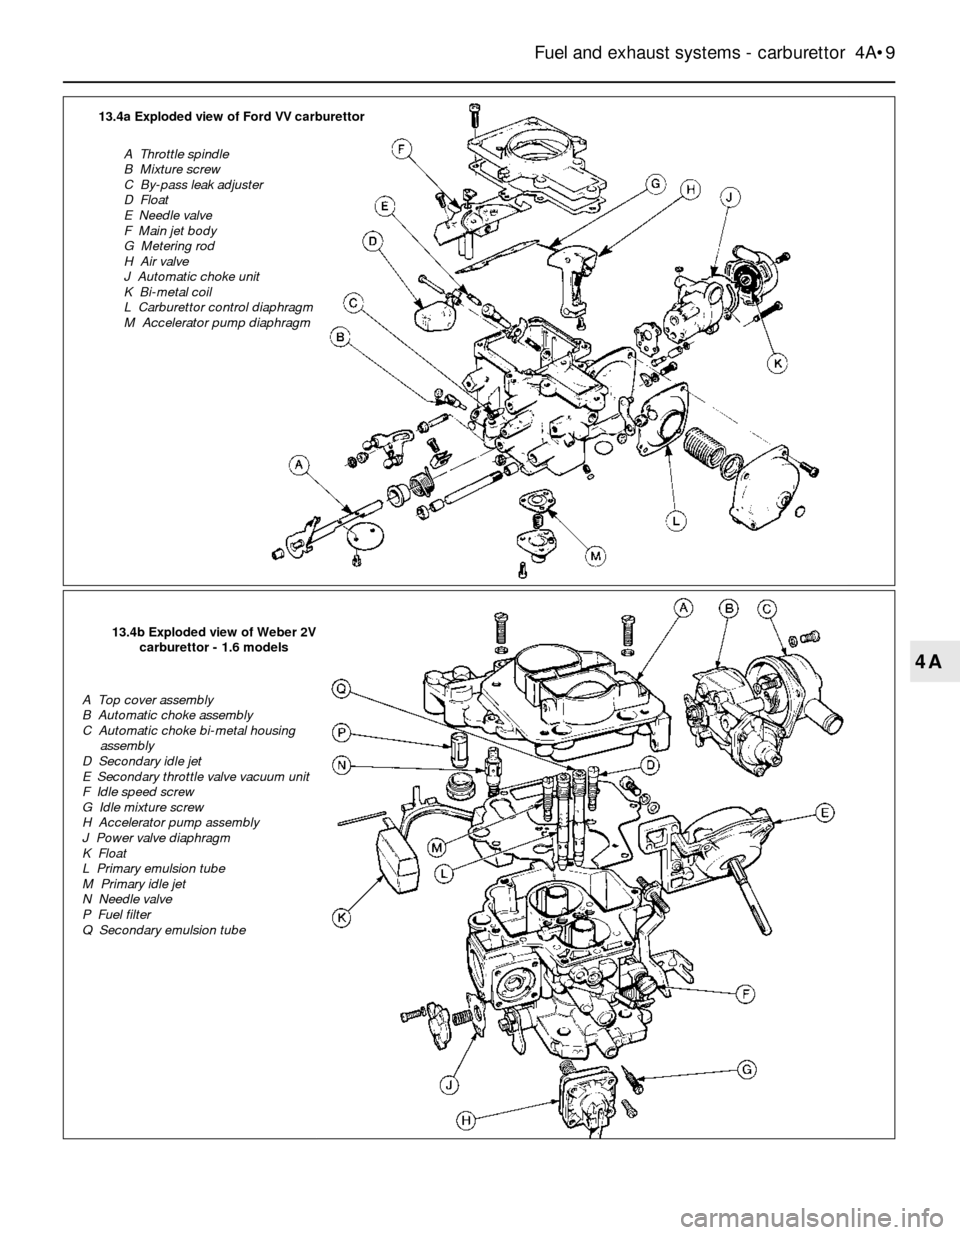 FORD SIERRA 1993 2.G Fuel And Exhaust Systems Carburettor Workshop Manual Fuel and exhaust systems - carburettor  4A•9
4A
13.4a Exploded view of Ford VV carburettor
A  Throttle spindle
B  Mixture screw
C  By-pass leak adjuster
D  Float
E  Needle valve
F  Main jet body
G  